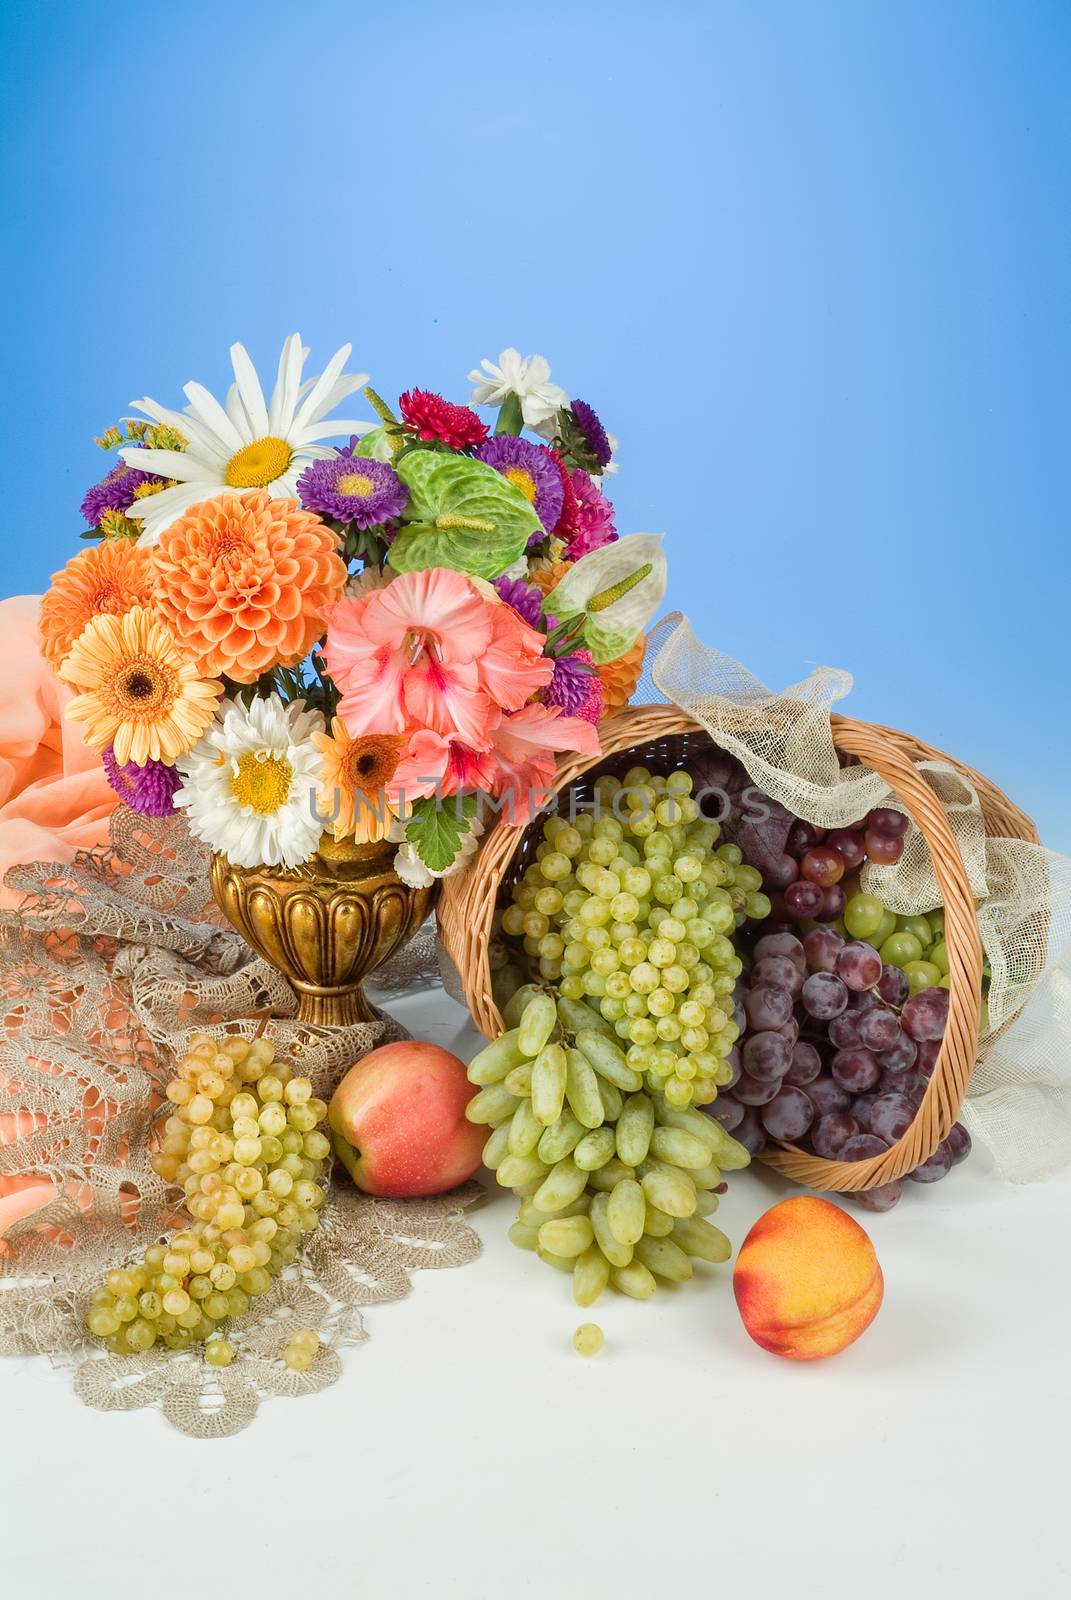 Fruits and flowers on a studio background